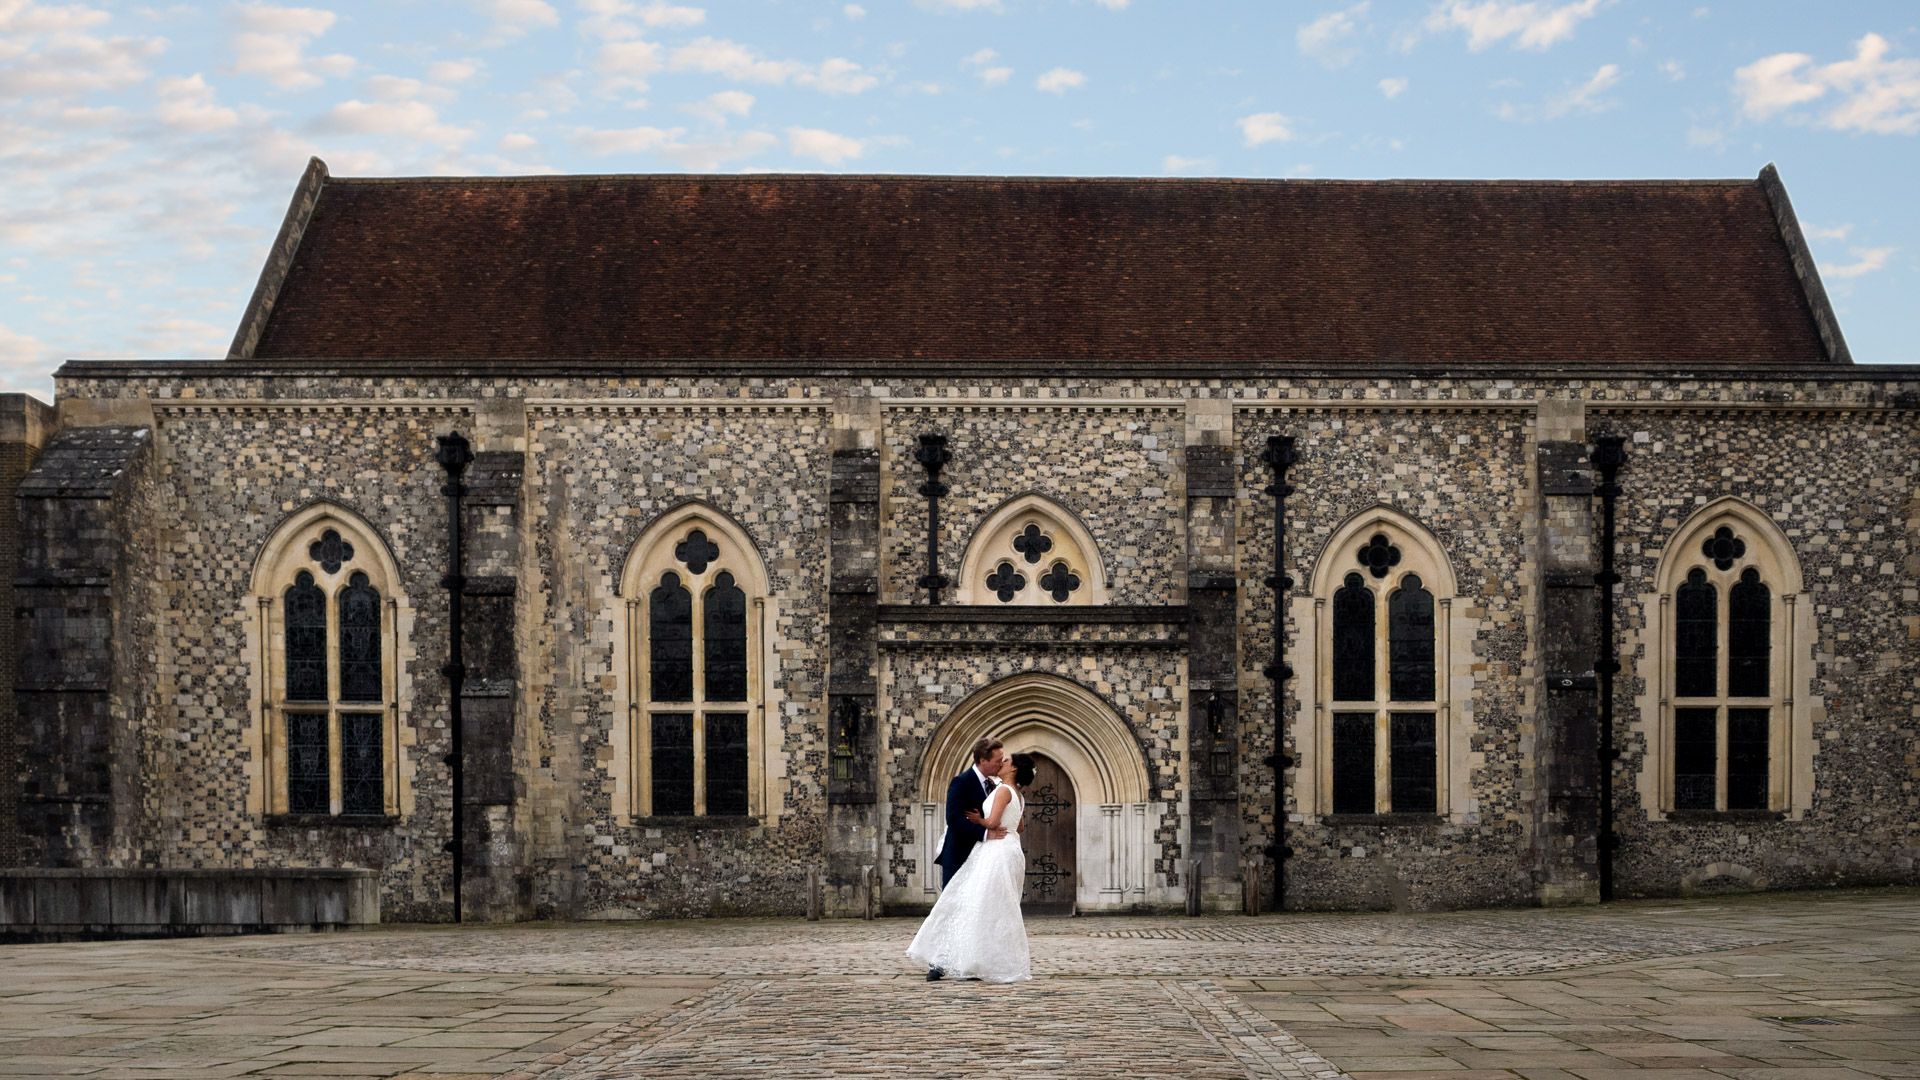 Winchester Registry Office wedding for Luke and Aisha